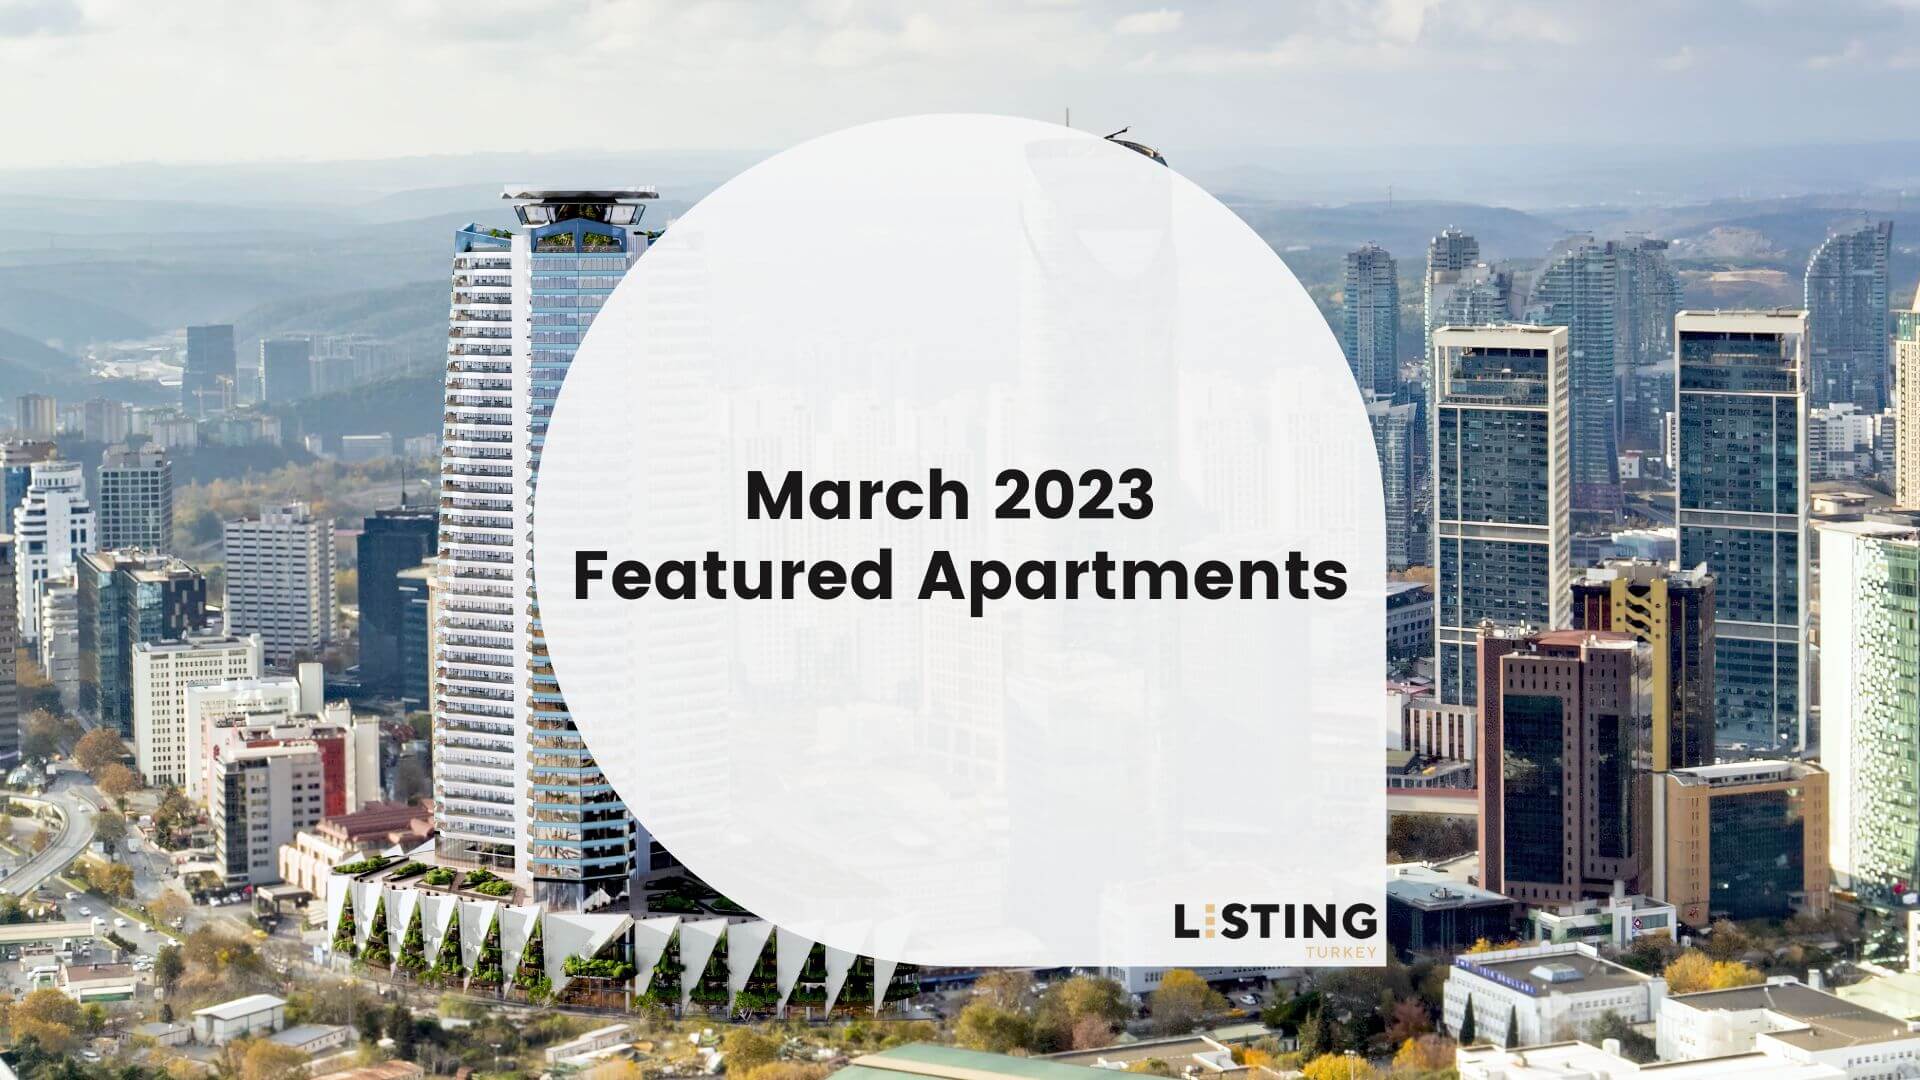 March 2023 Featured Apartments